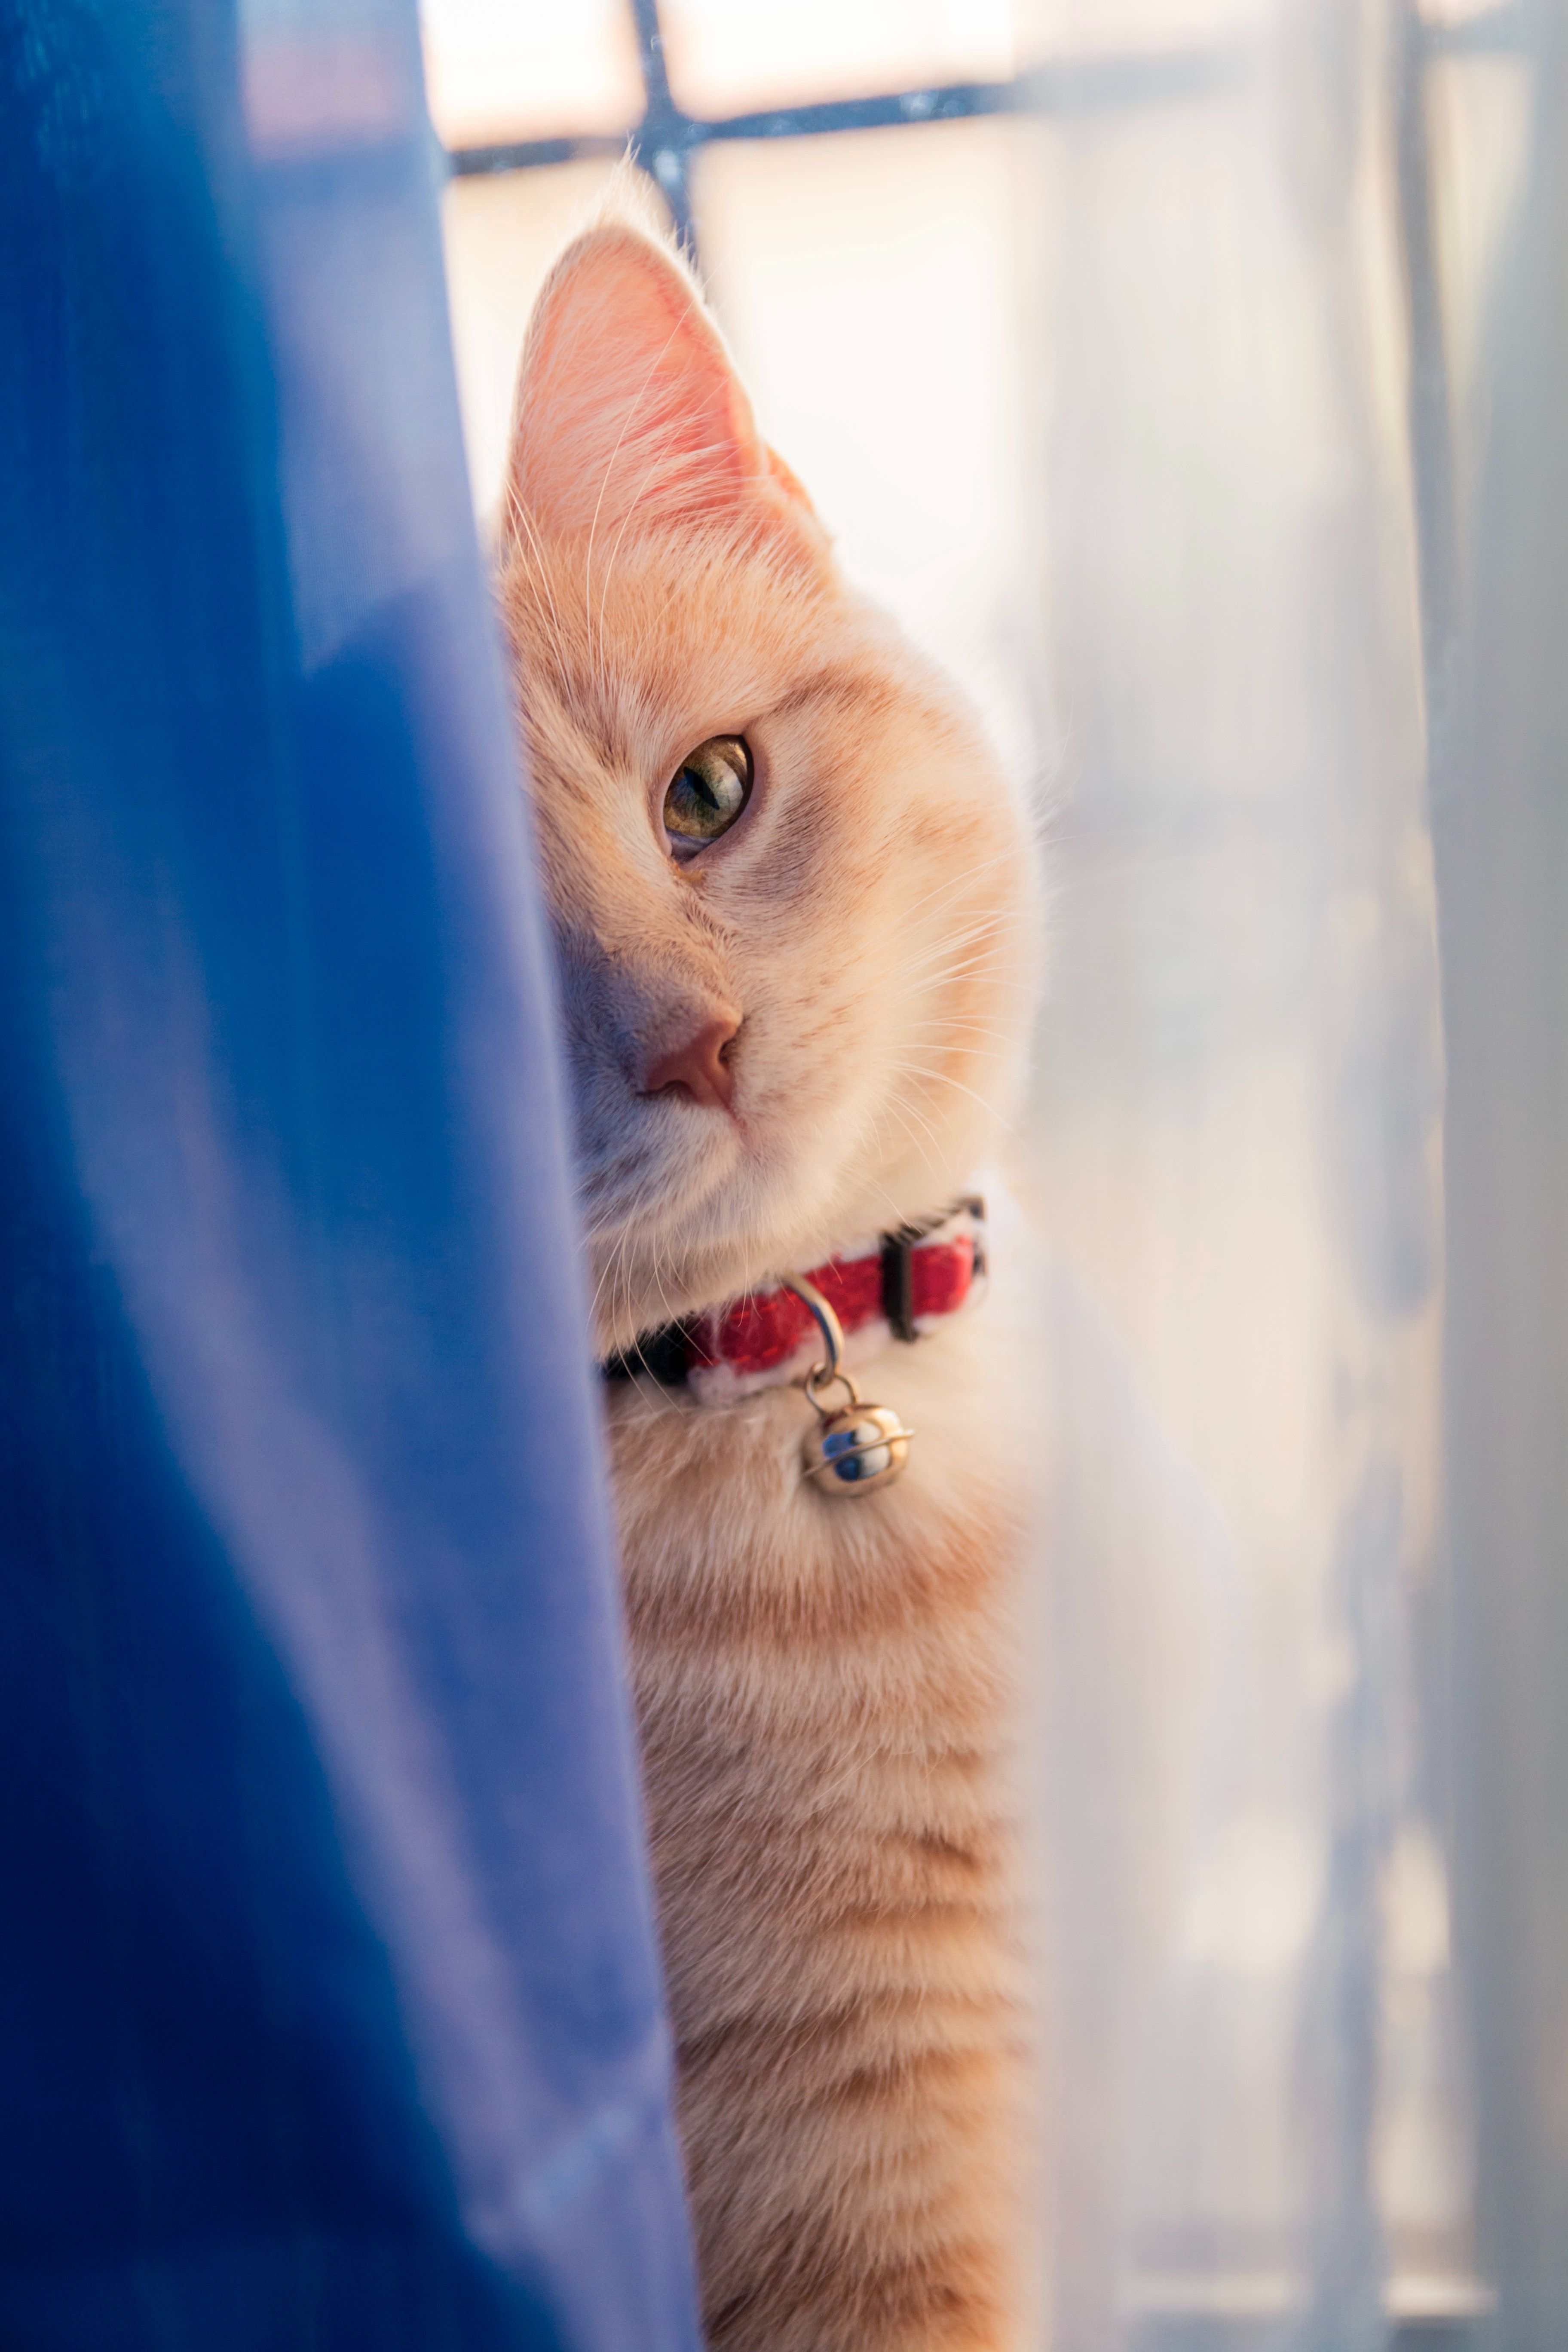 A cat is sitting behind the curtain - Cat